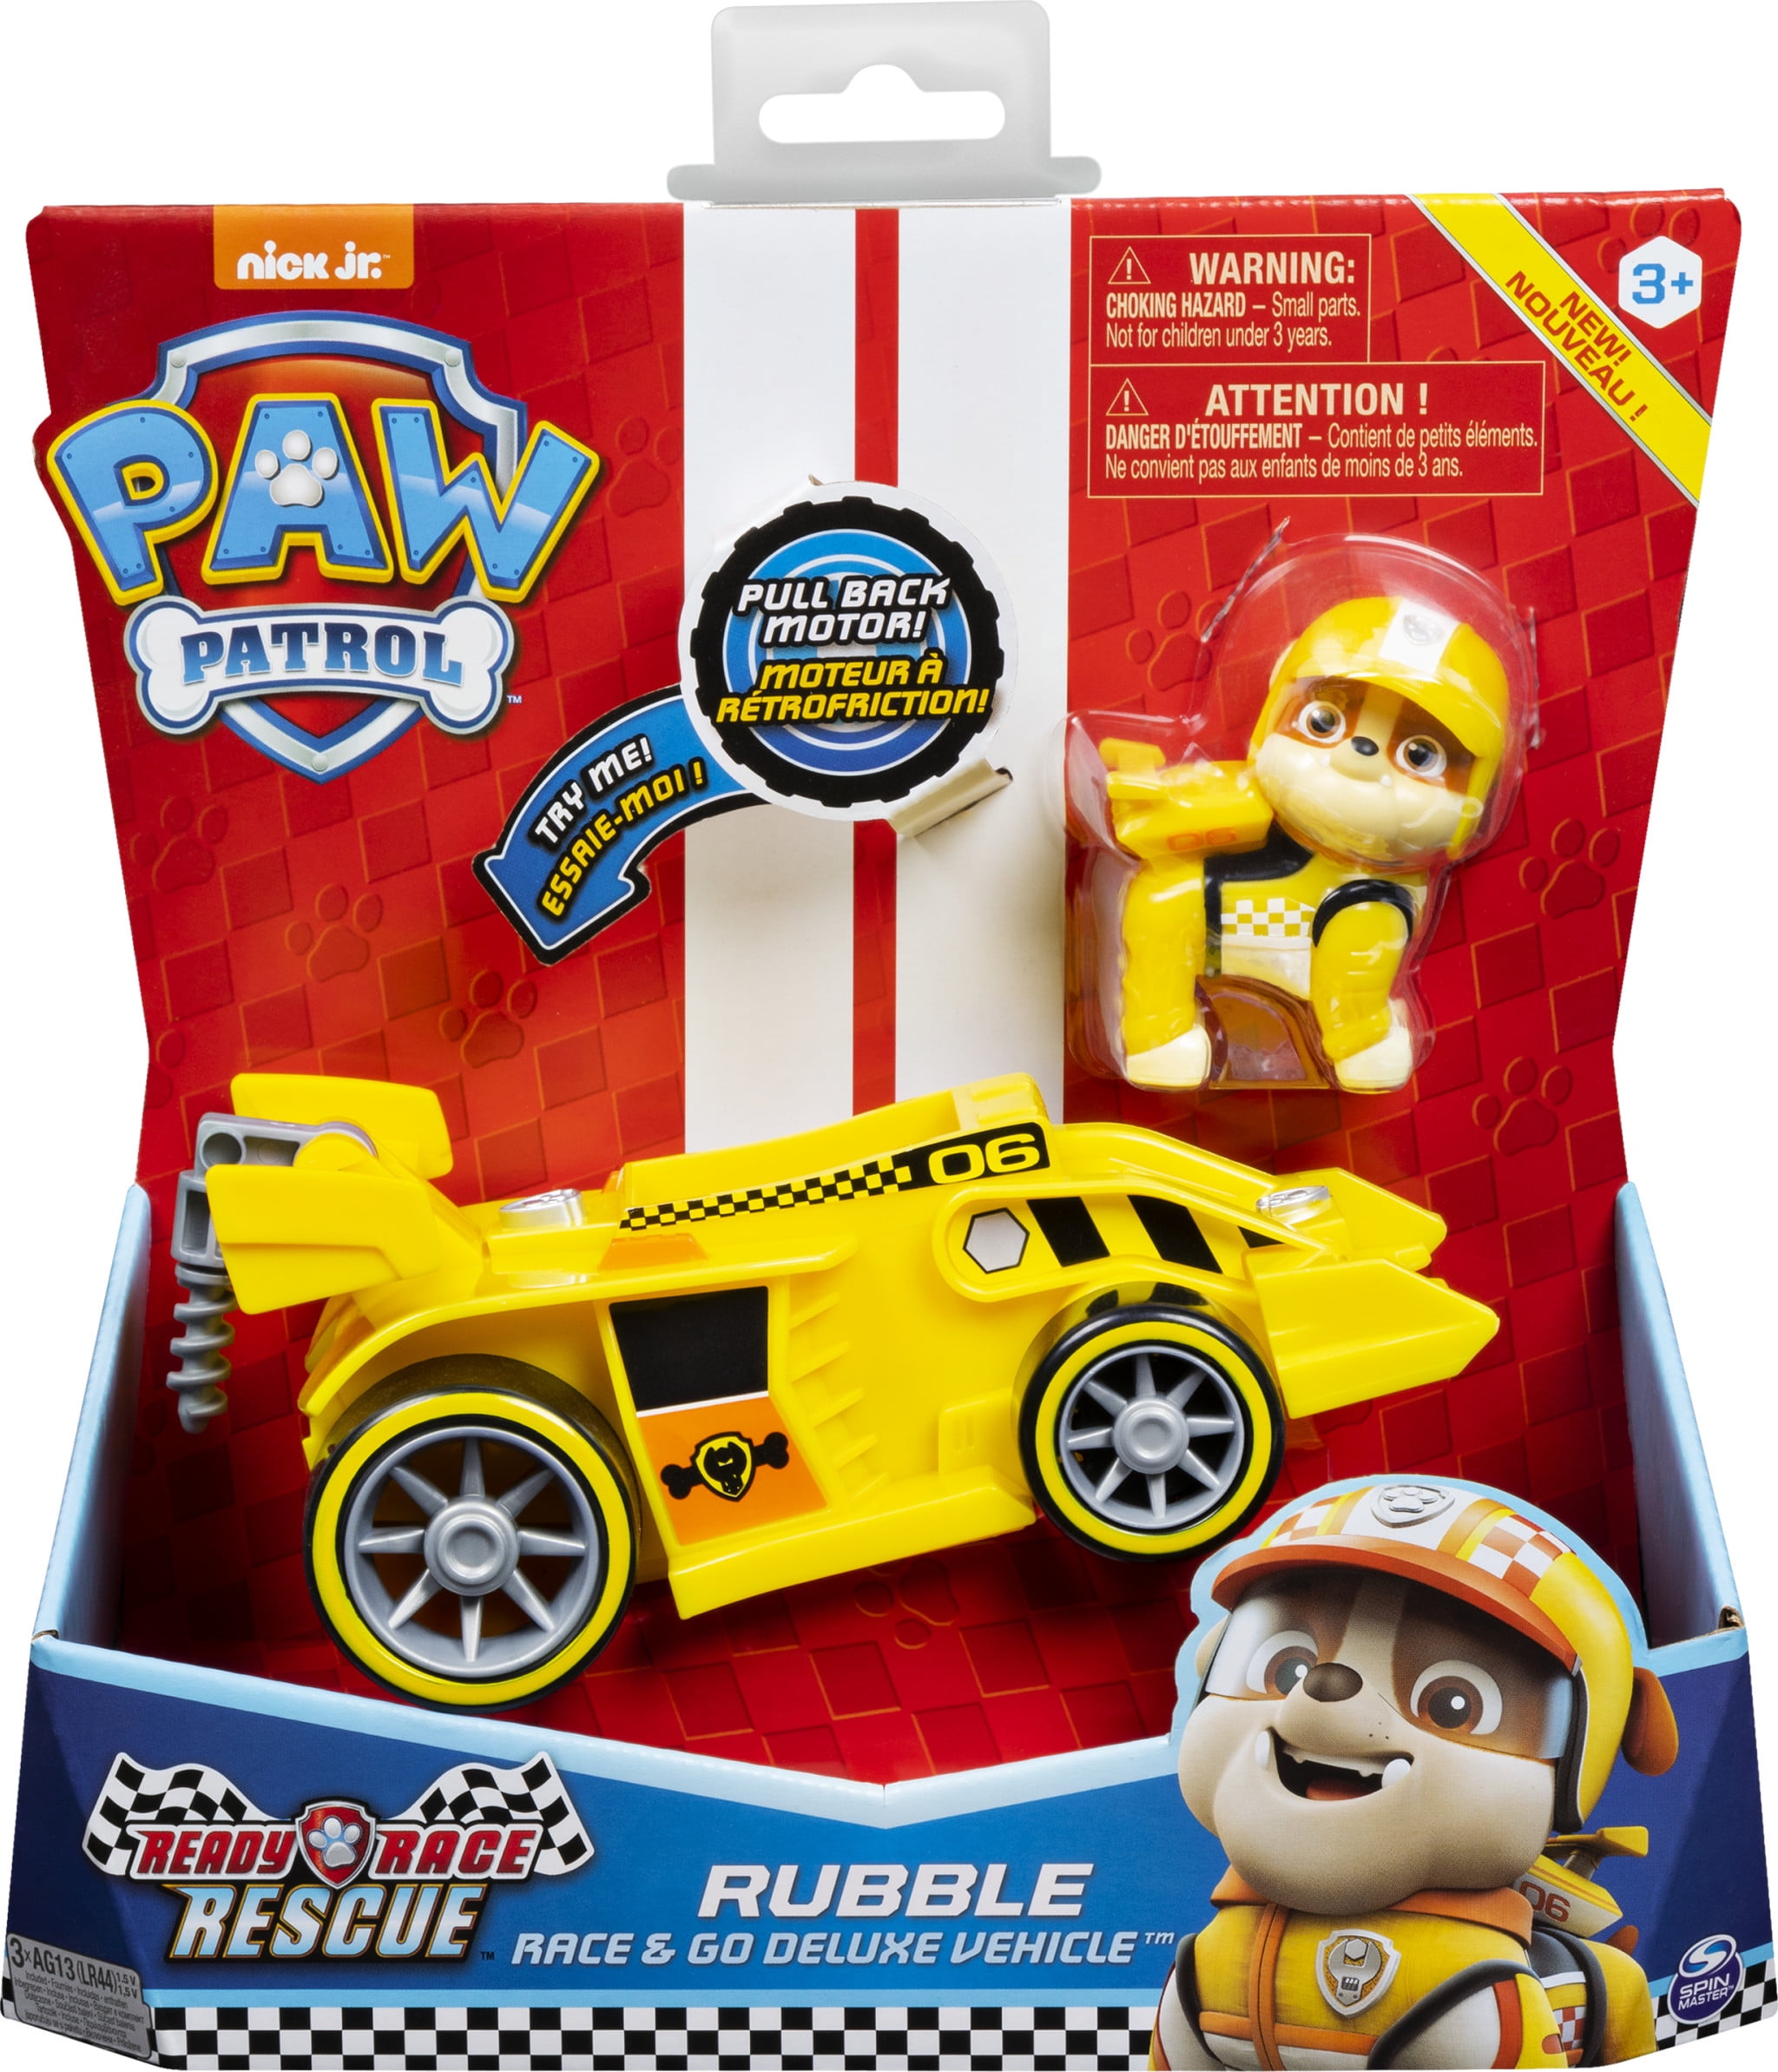 Details about   Paw Patrol Ready Race Rescue Rubble Race & Go Deluxe Vehicle w/ Racing Sound NIB 